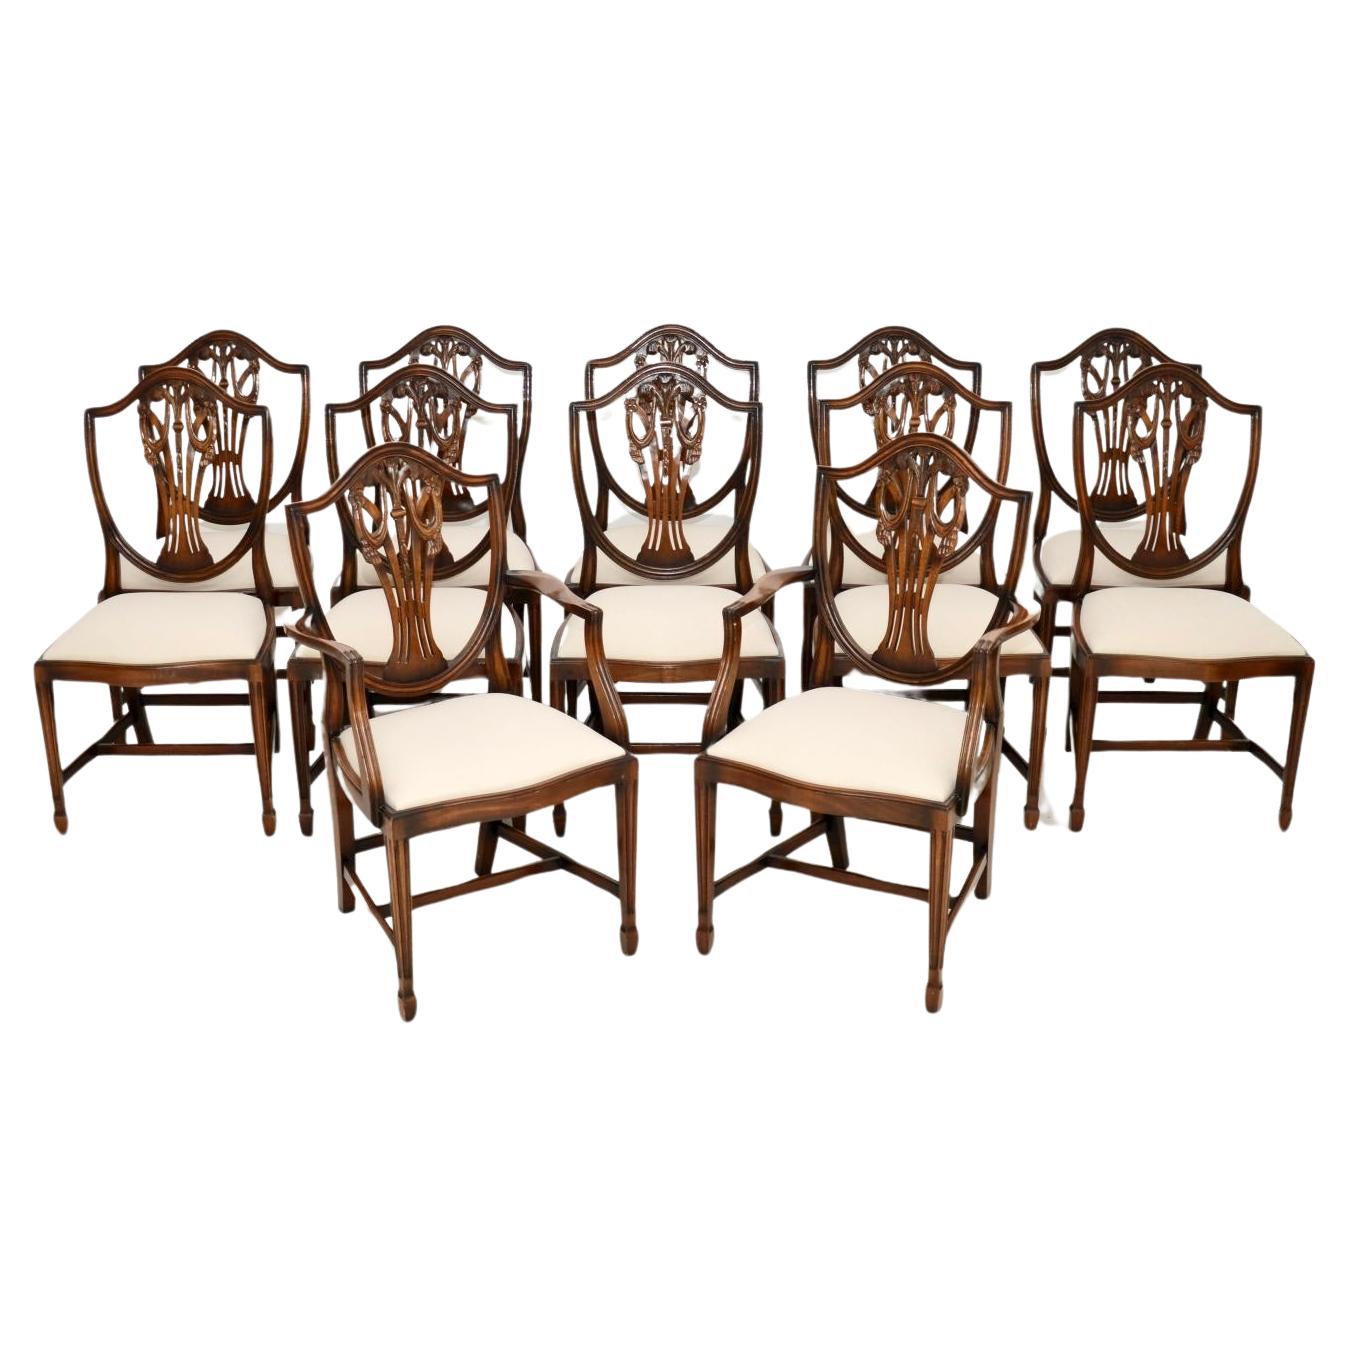 Set of Twelve Antique Shield Back Dining Chairs